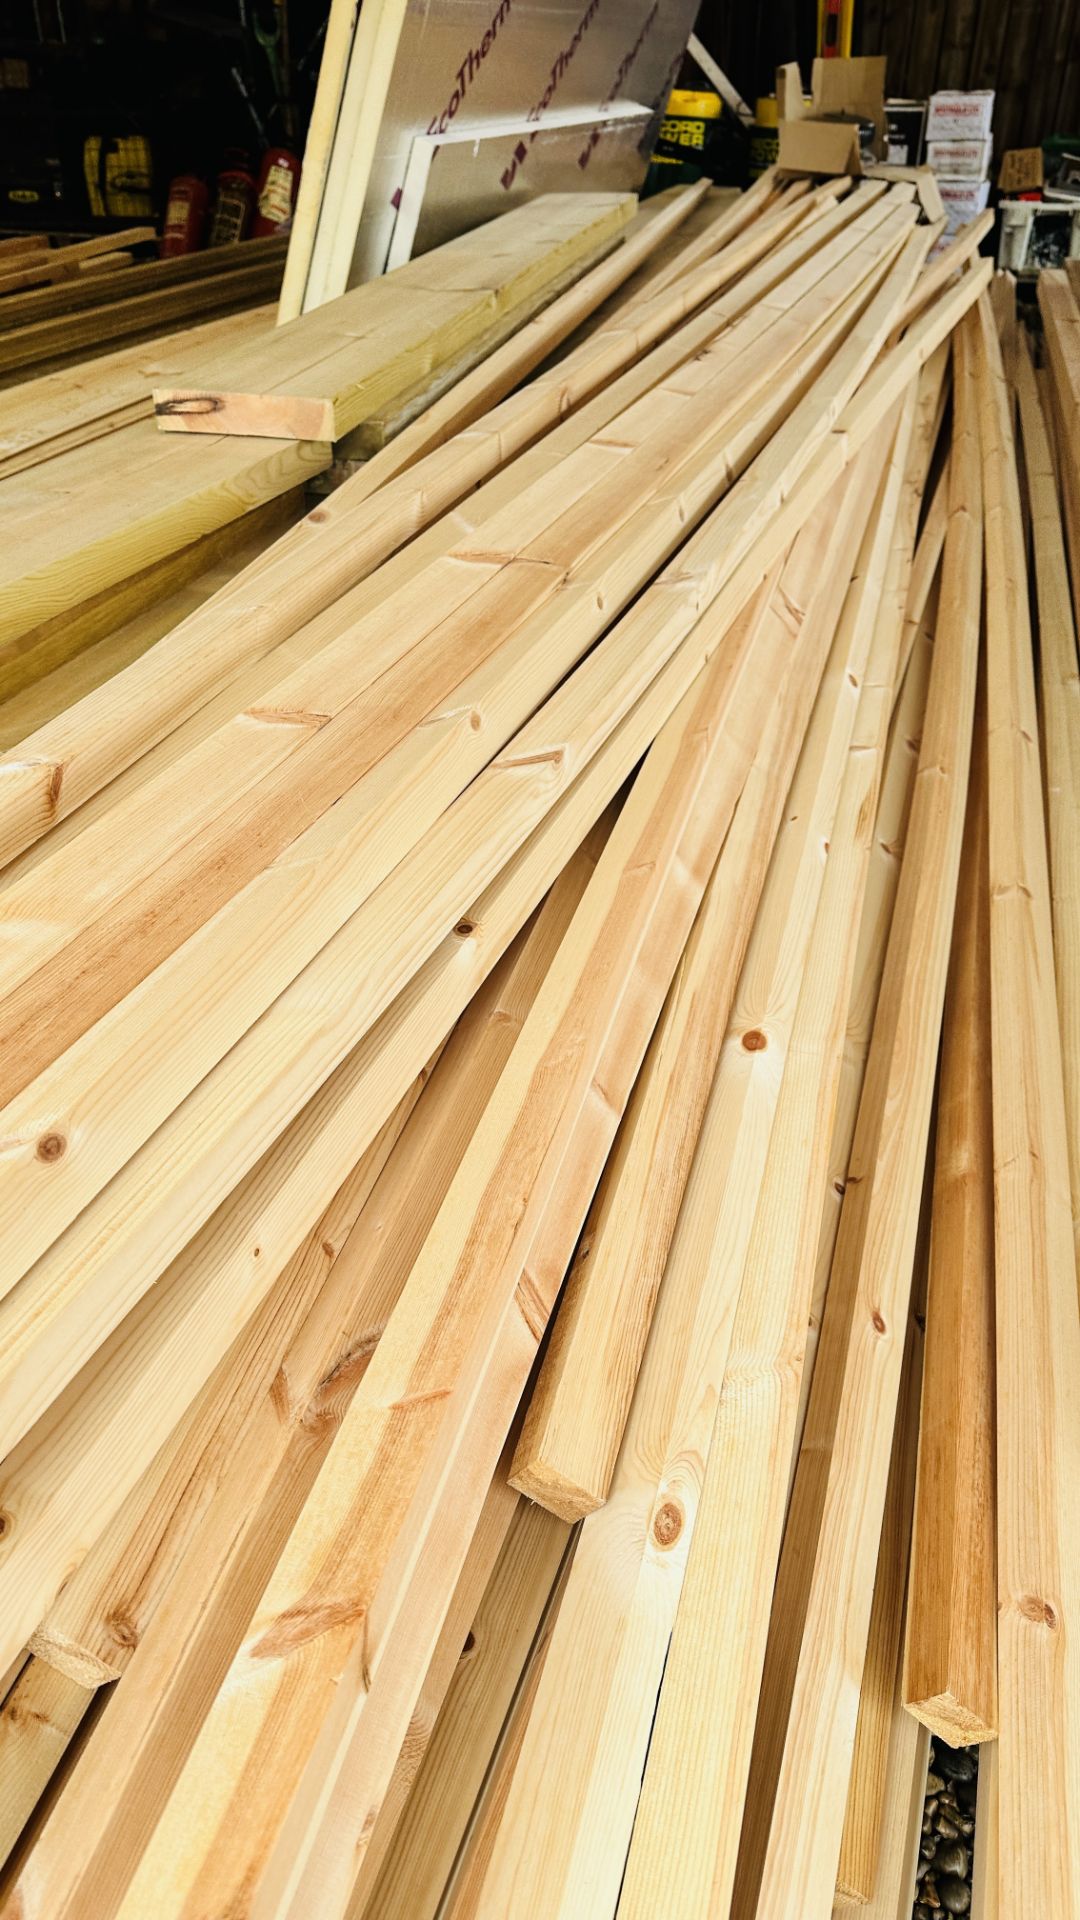 APPROX 140 LENGTHS OF 45MM X 35MM PLANED TIMBER, MINIMUM LENGTHS APPROX 4M, MAXIMUM LENGTH APPROX 5. - Image 3 of 6